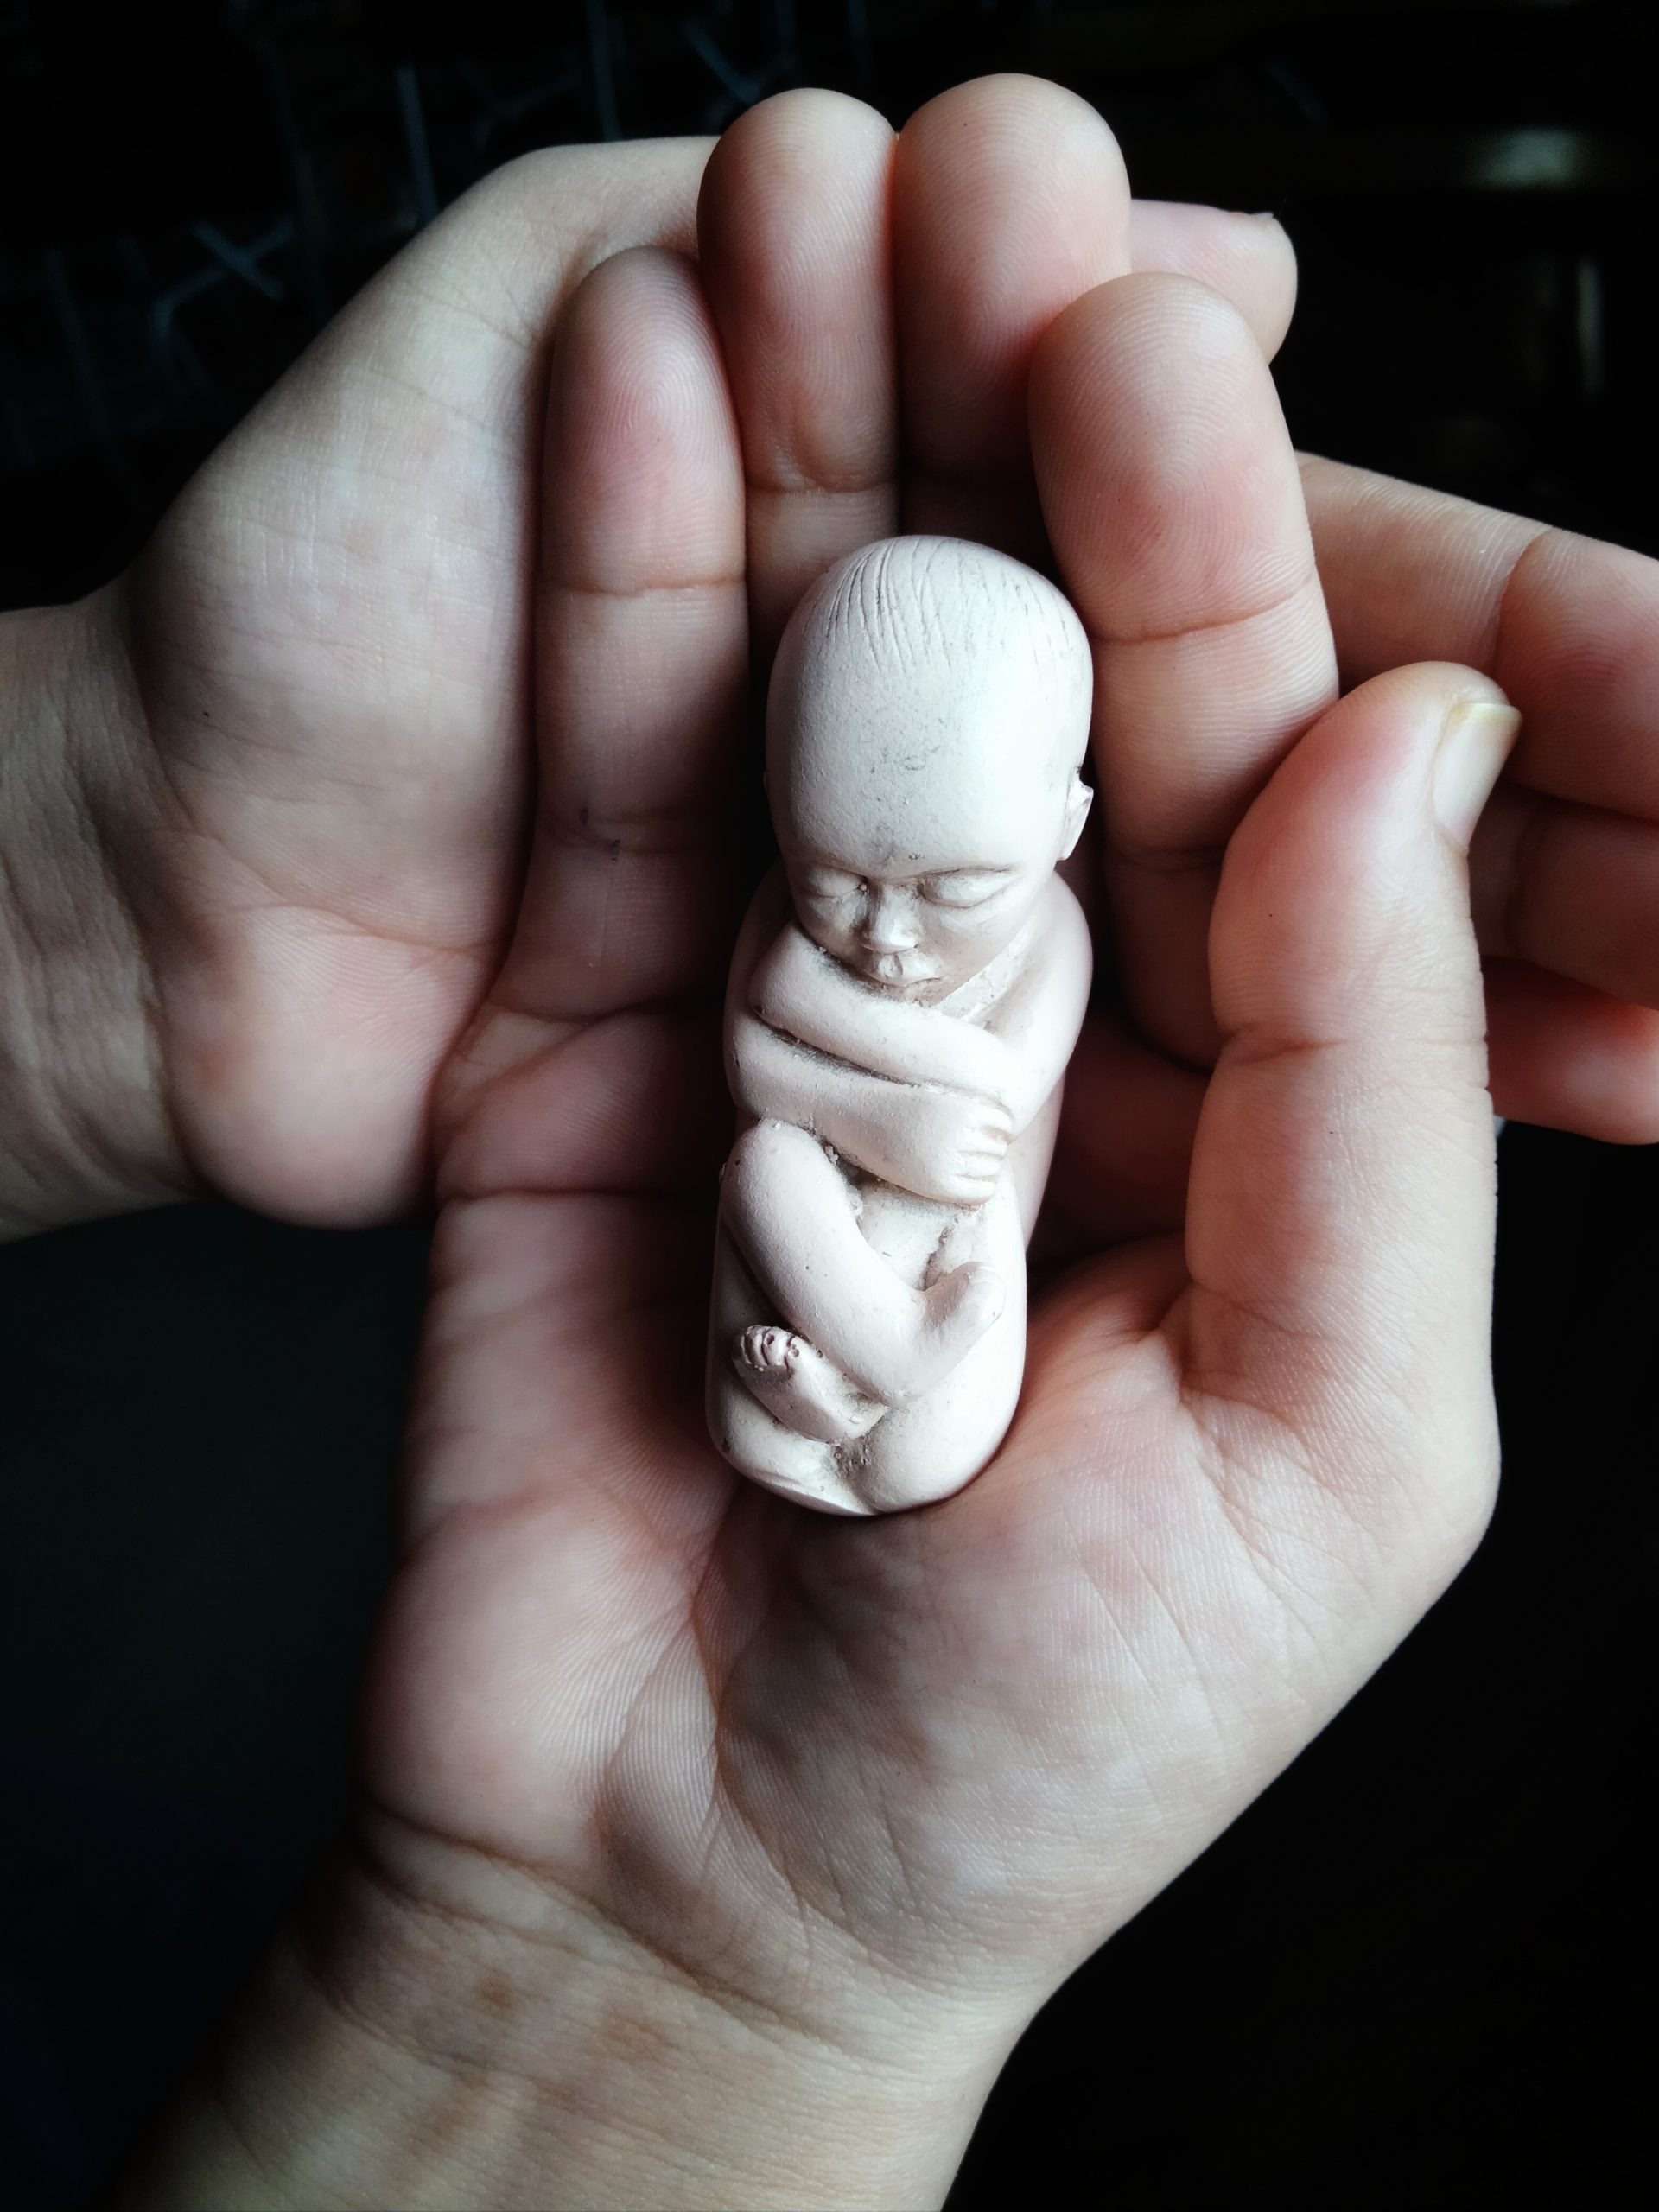 A tiny statue of baby in hand